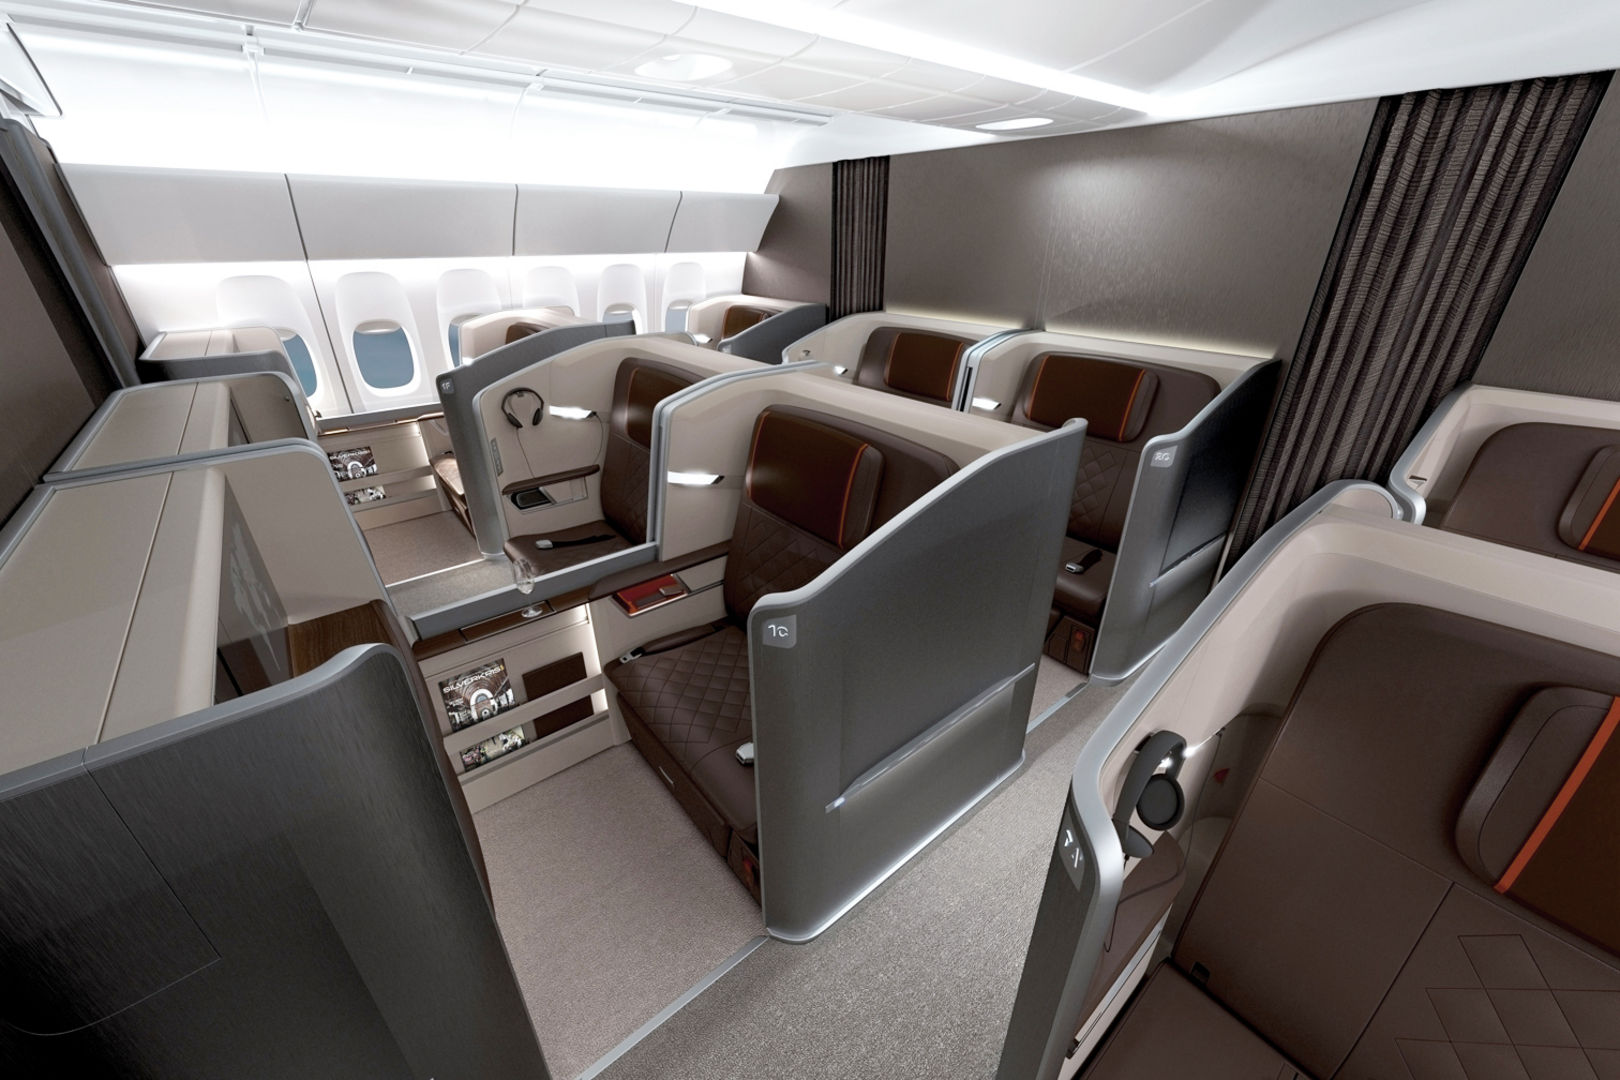 Singapore Airlines Cabin